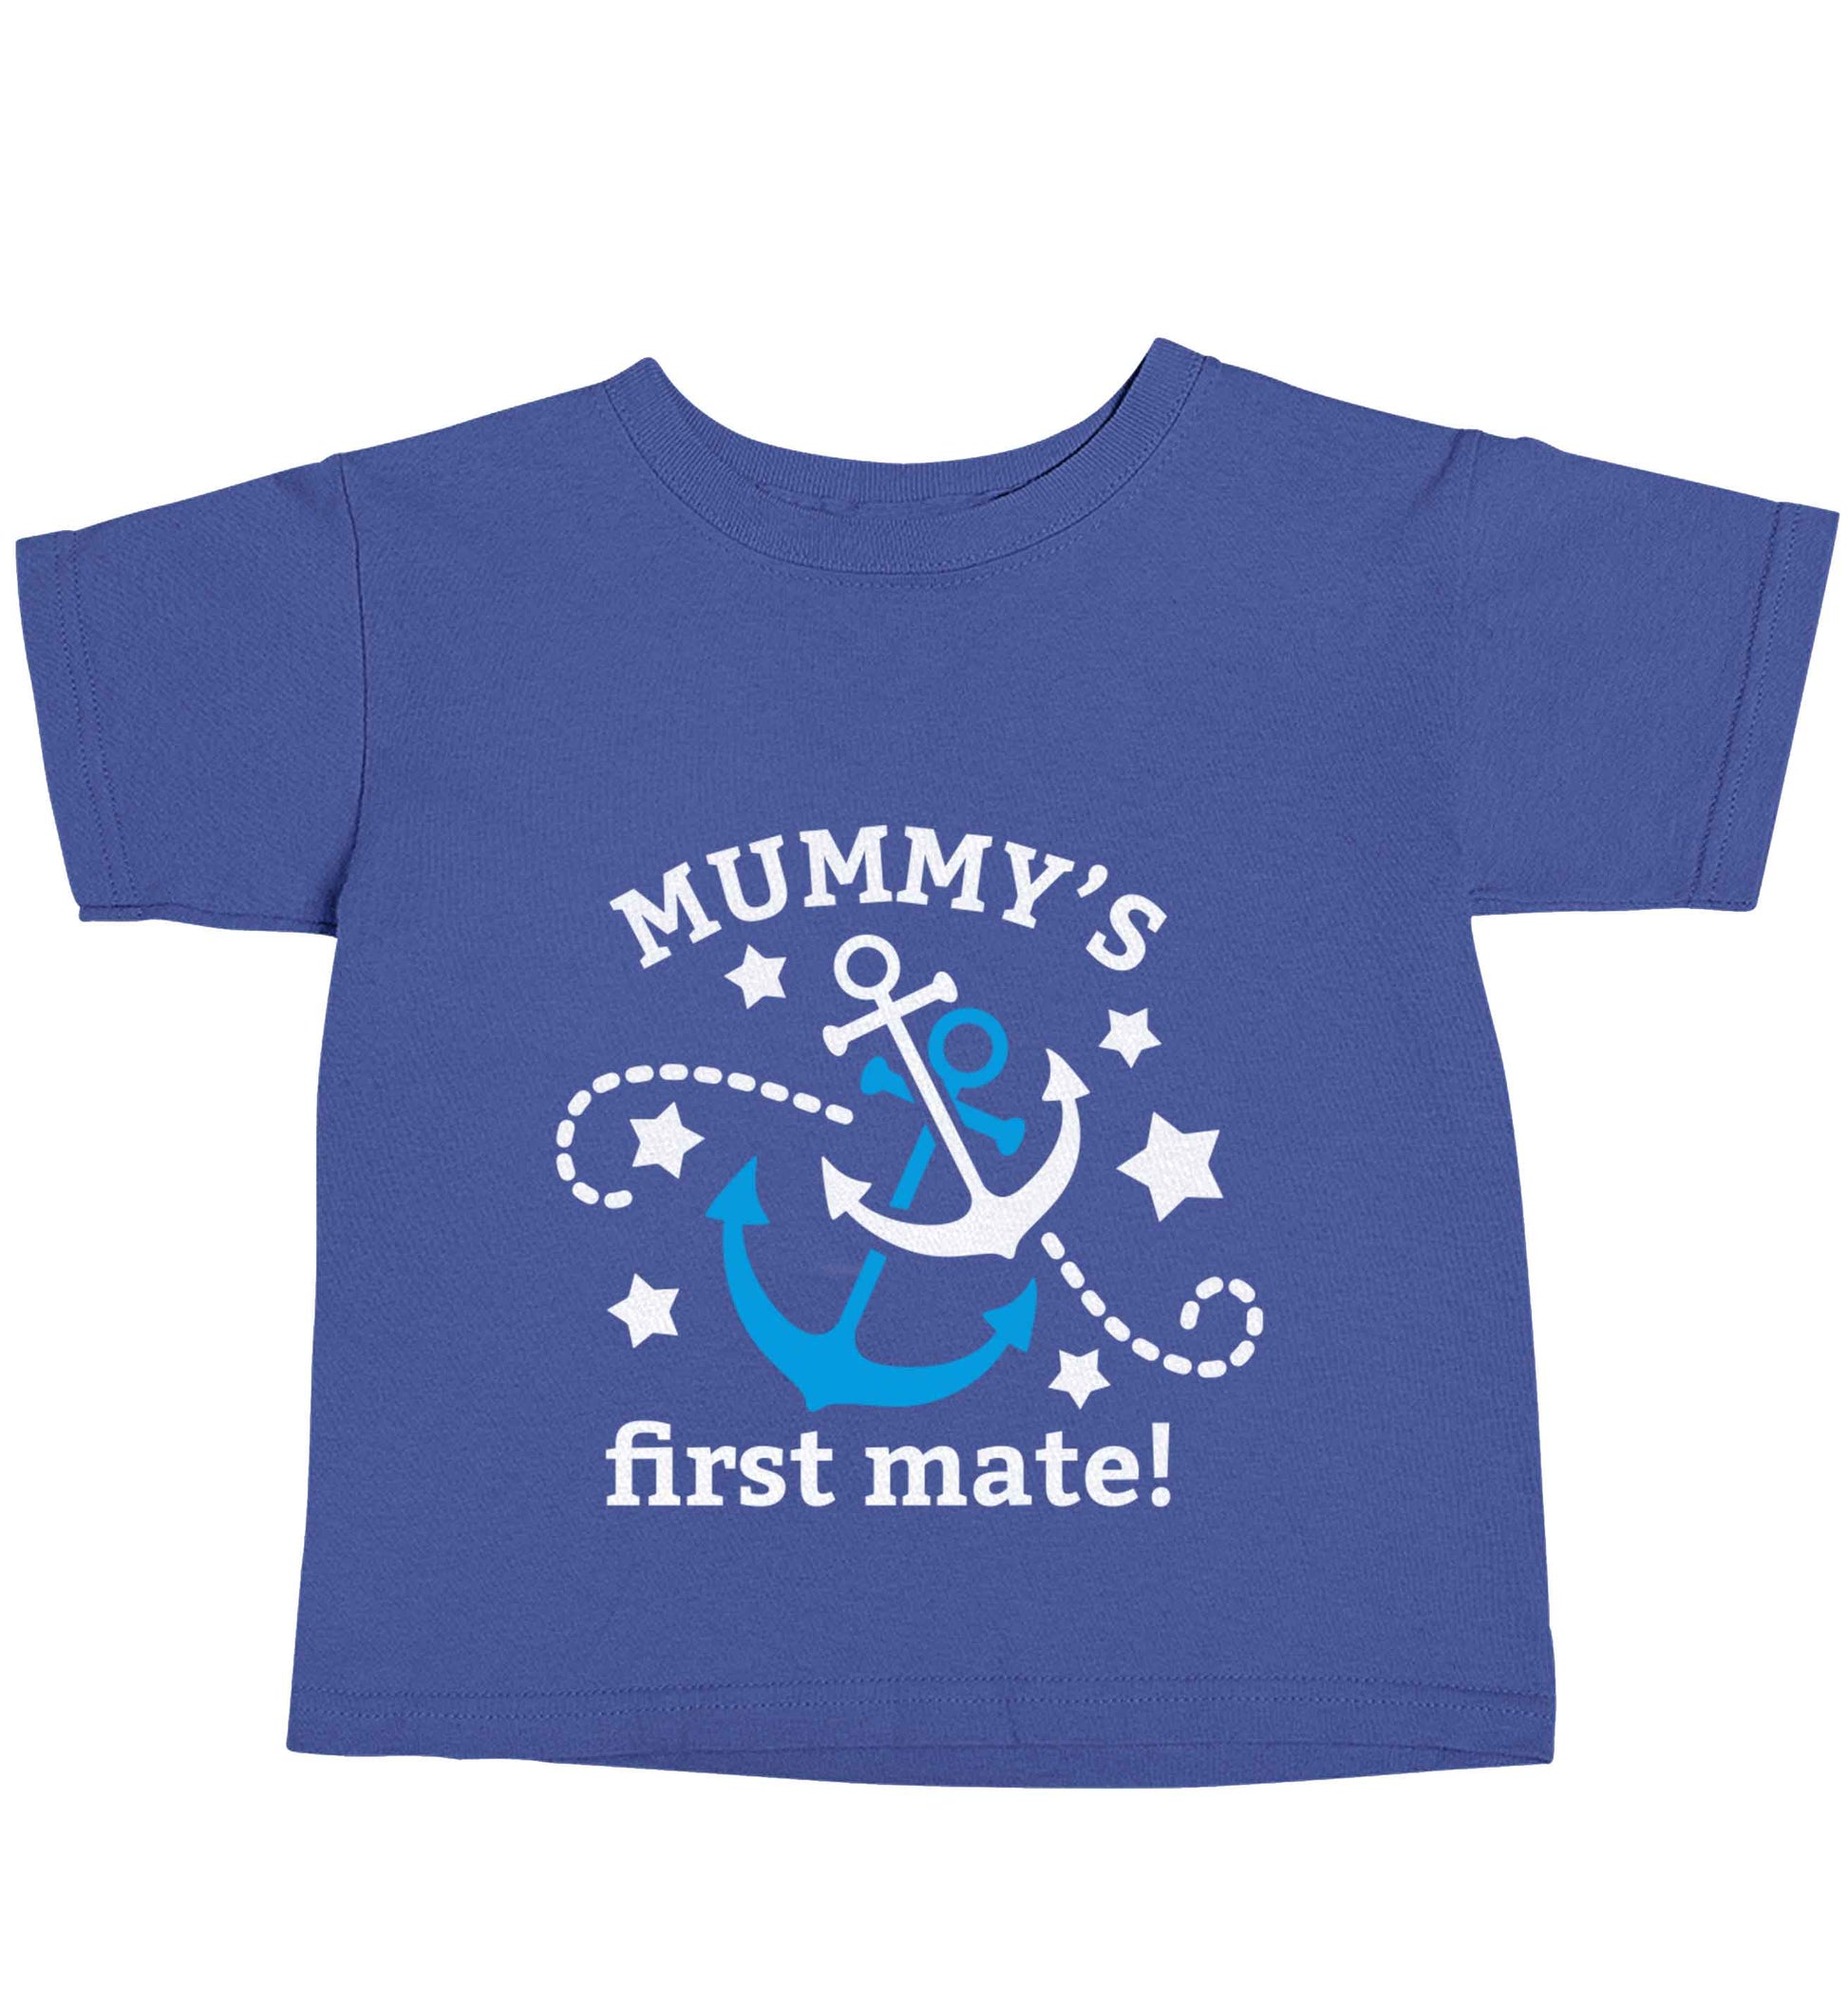 Mummy's First Mate blue baby toddler Tshirt 2 Years